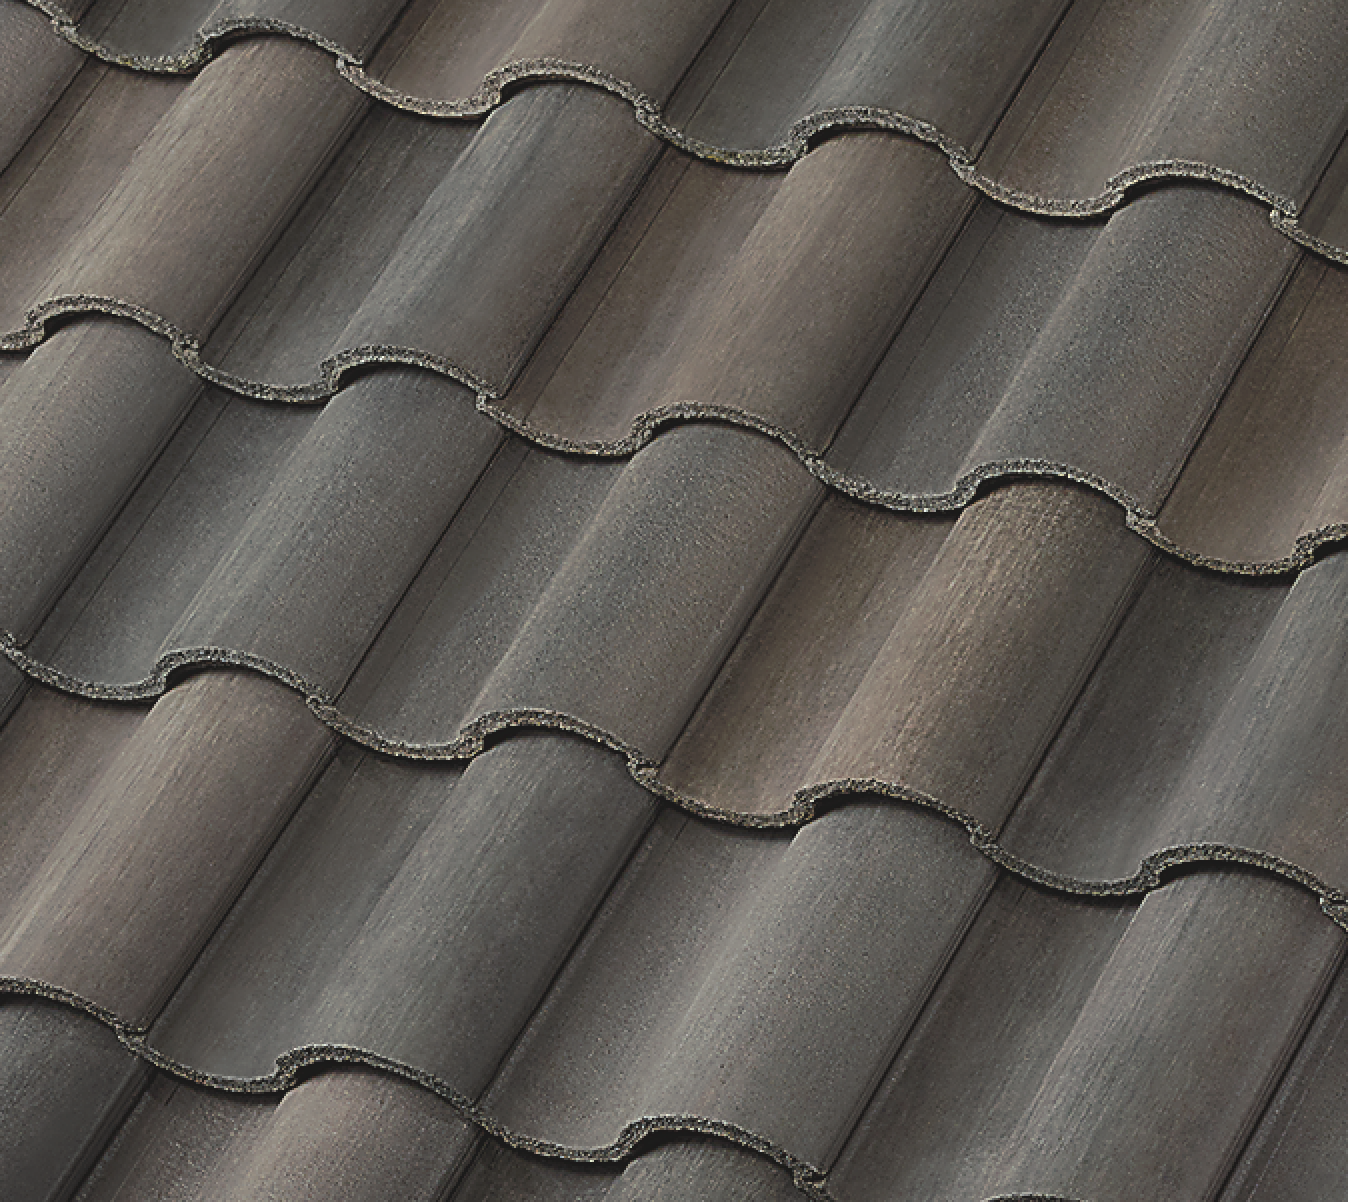 Concrete Roofing Tiles Available in Five New Colors Roofing